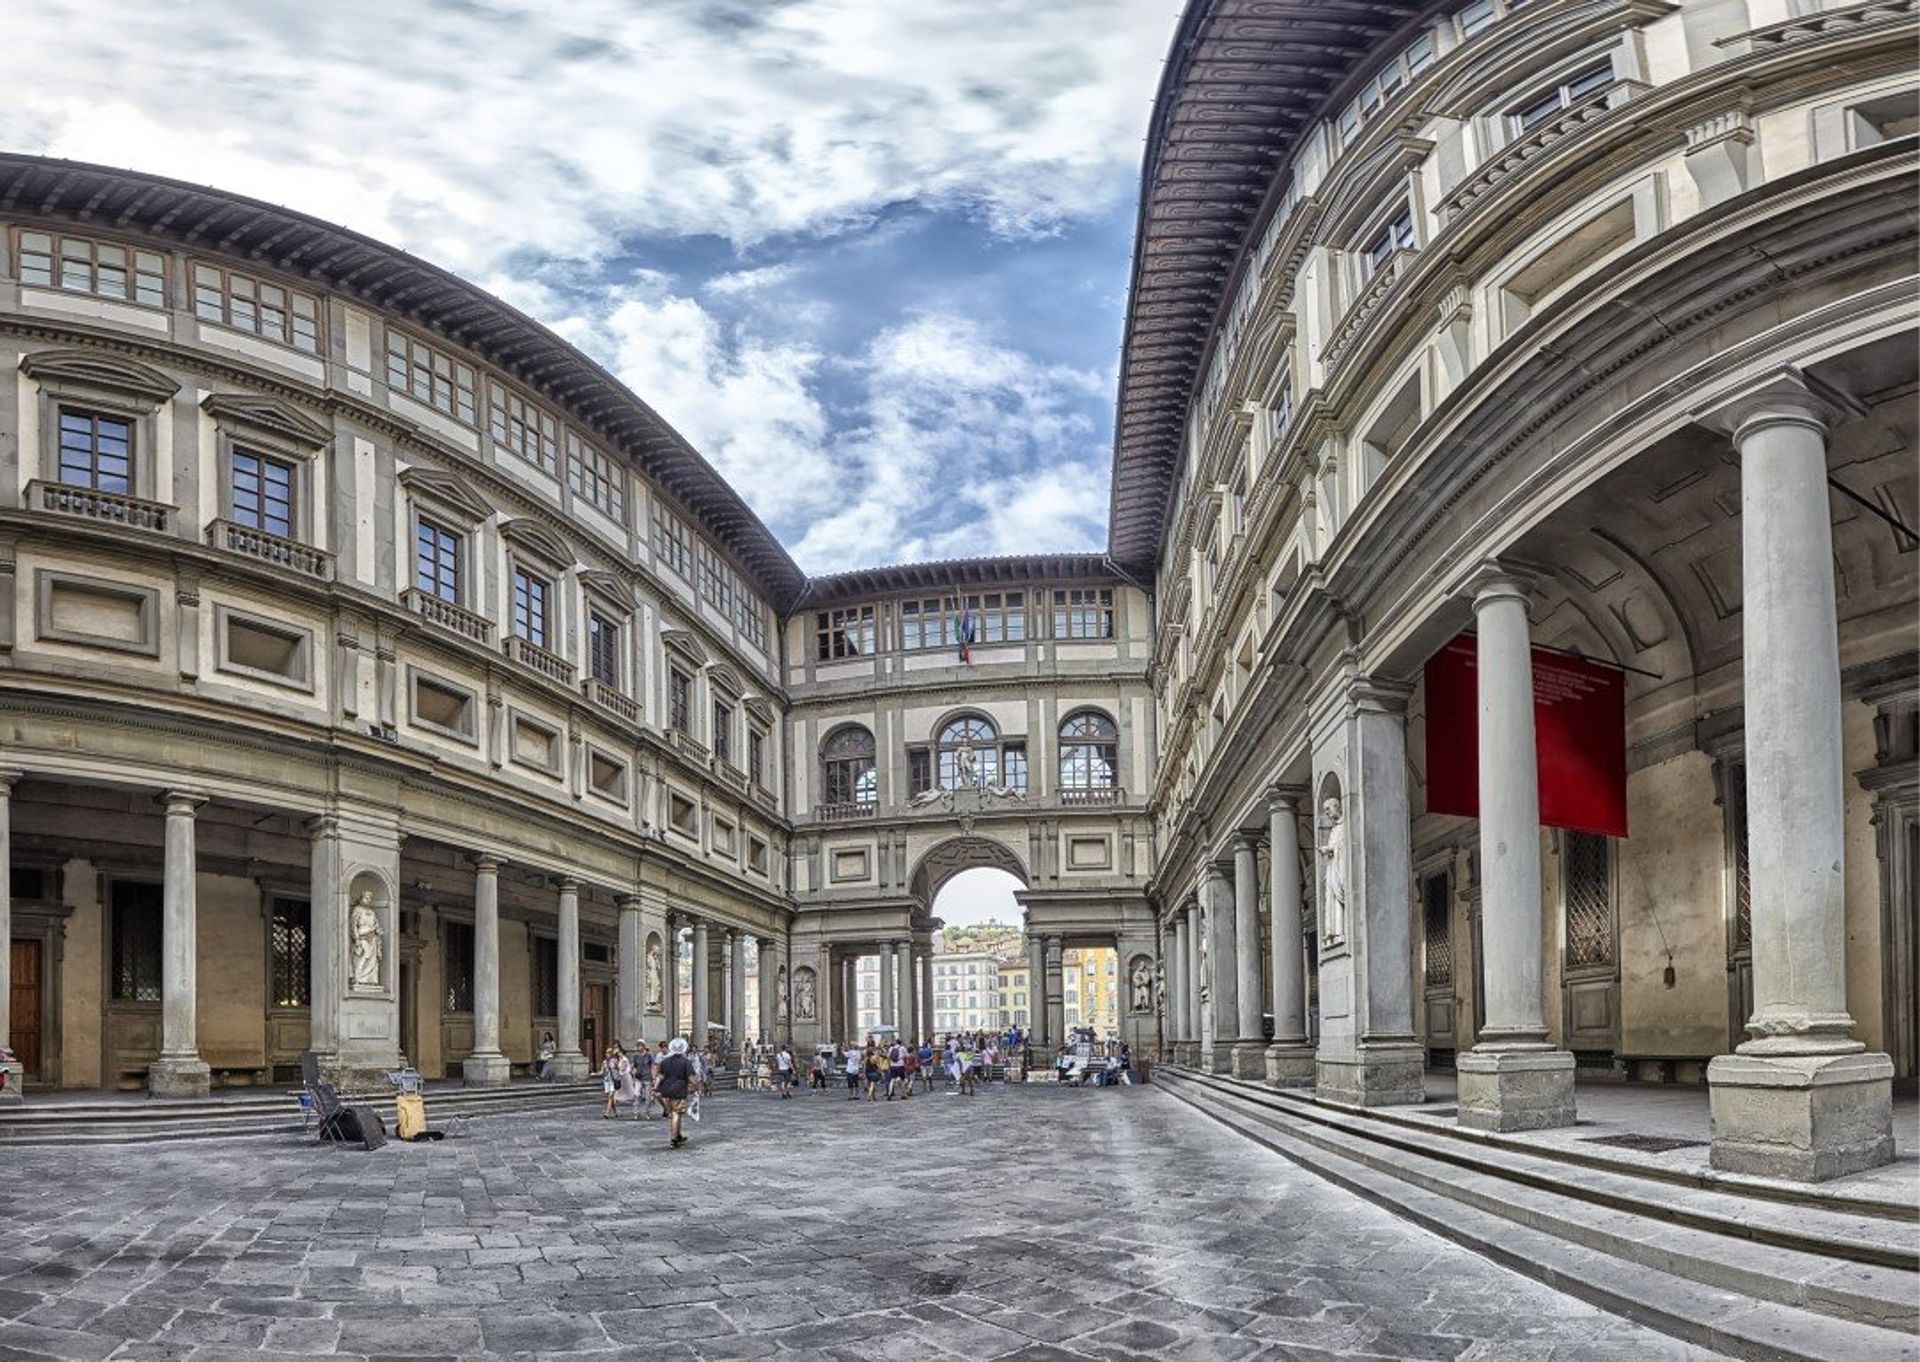 Discover the incredible artworks on display in the Uffizi Gallery, Florence